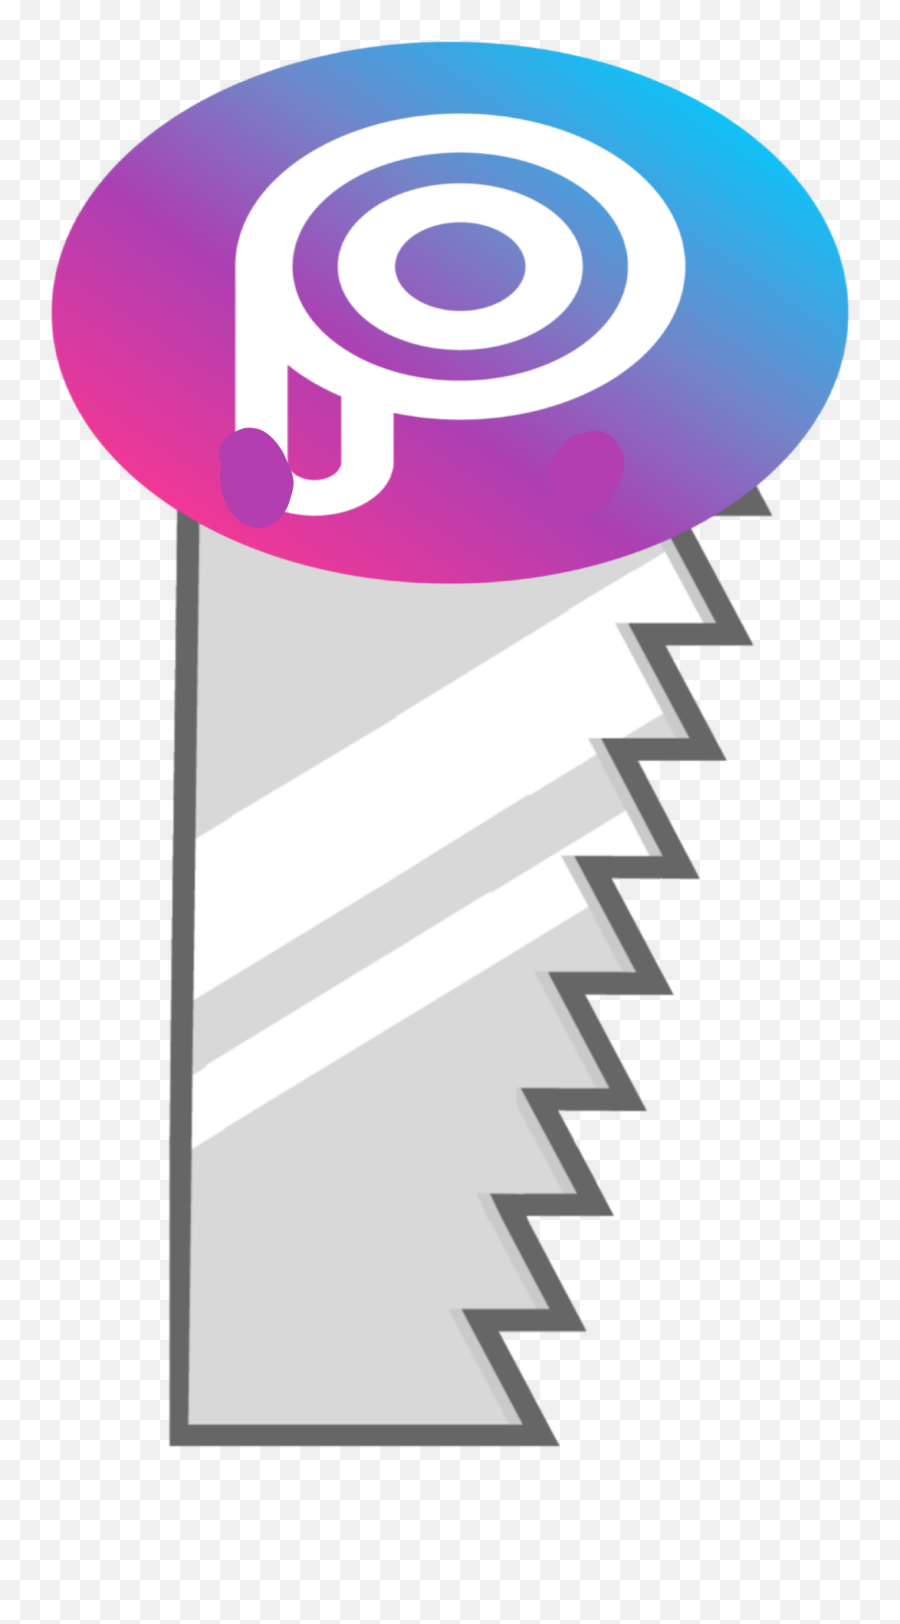 Freetoedit Picsart Sawbfb Bfbsaw Sticker By Tacothecutefan - Bfdi Saw Body Png,App Icon Stickers